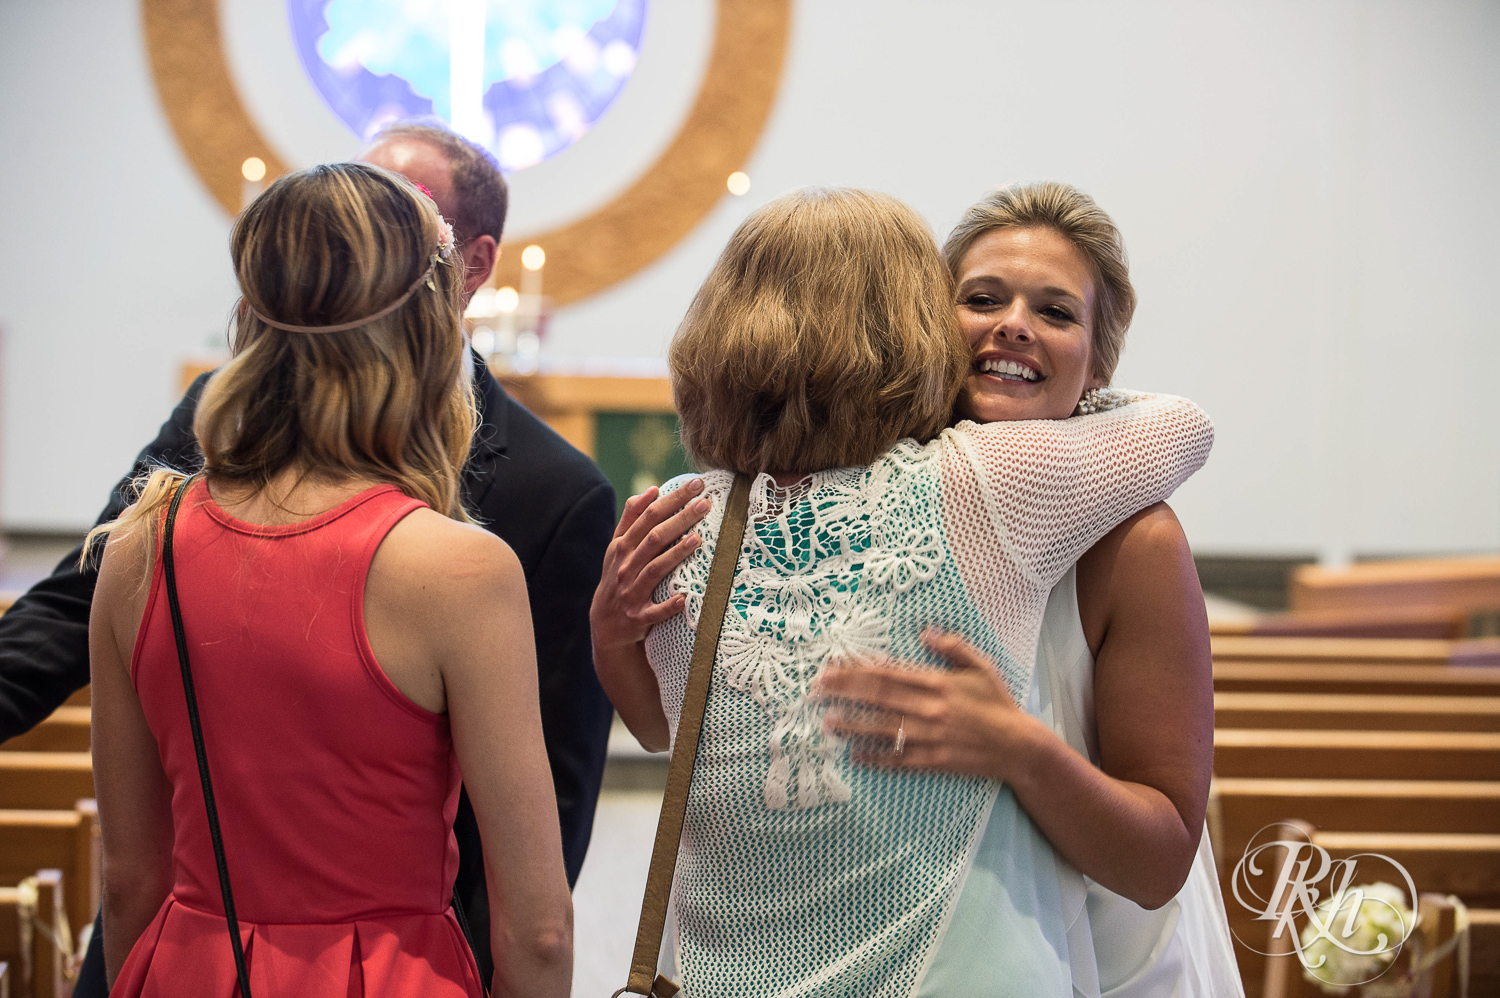 Bride and groom hug guests after a church wedding ceremony in Minneapolis, Minnesota.